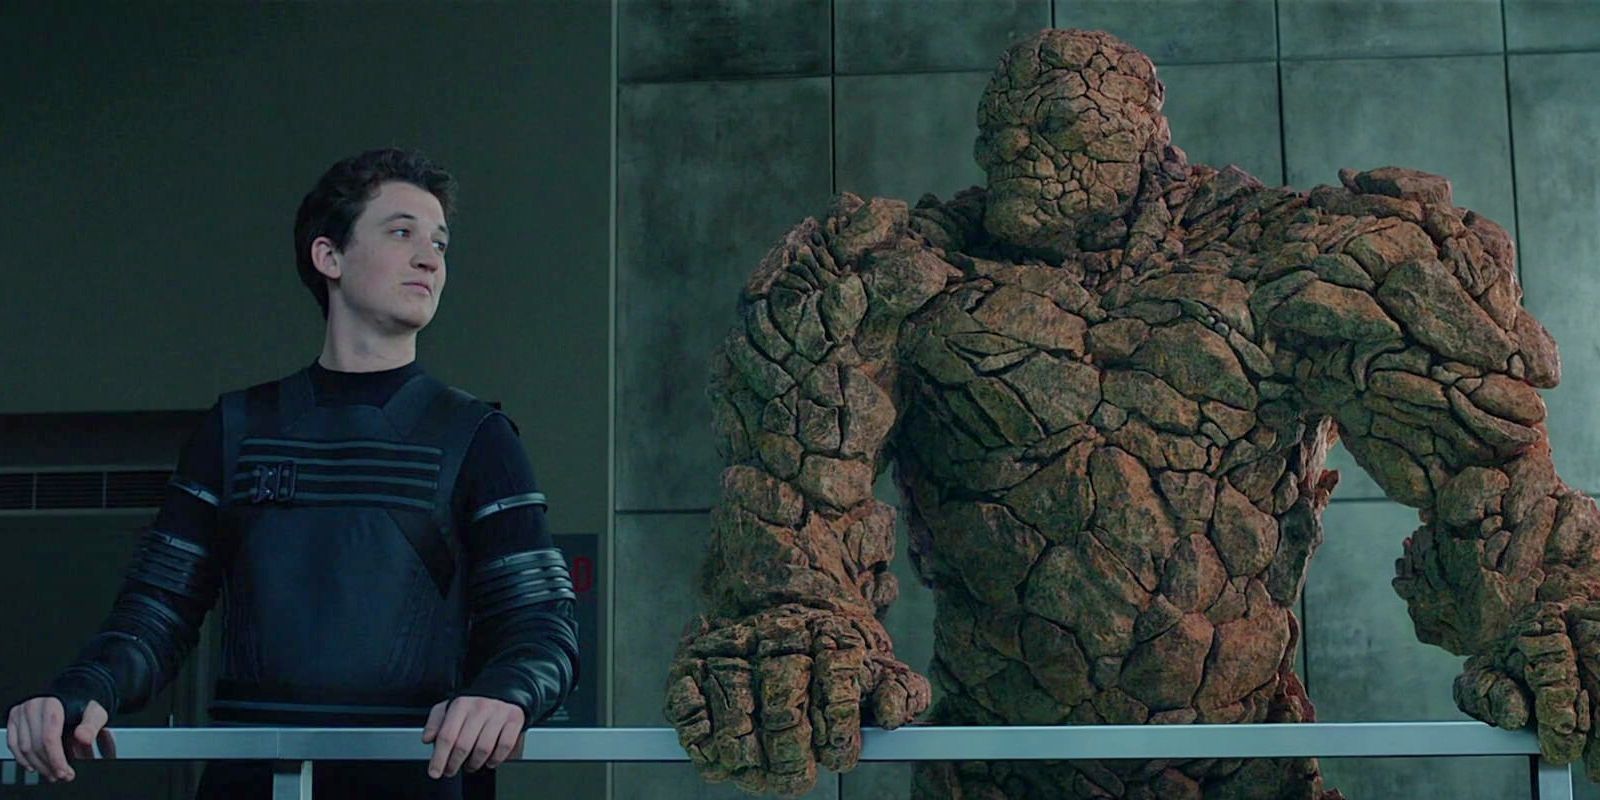 Mr. Fantastic and The Thing talking in Fantastic Four